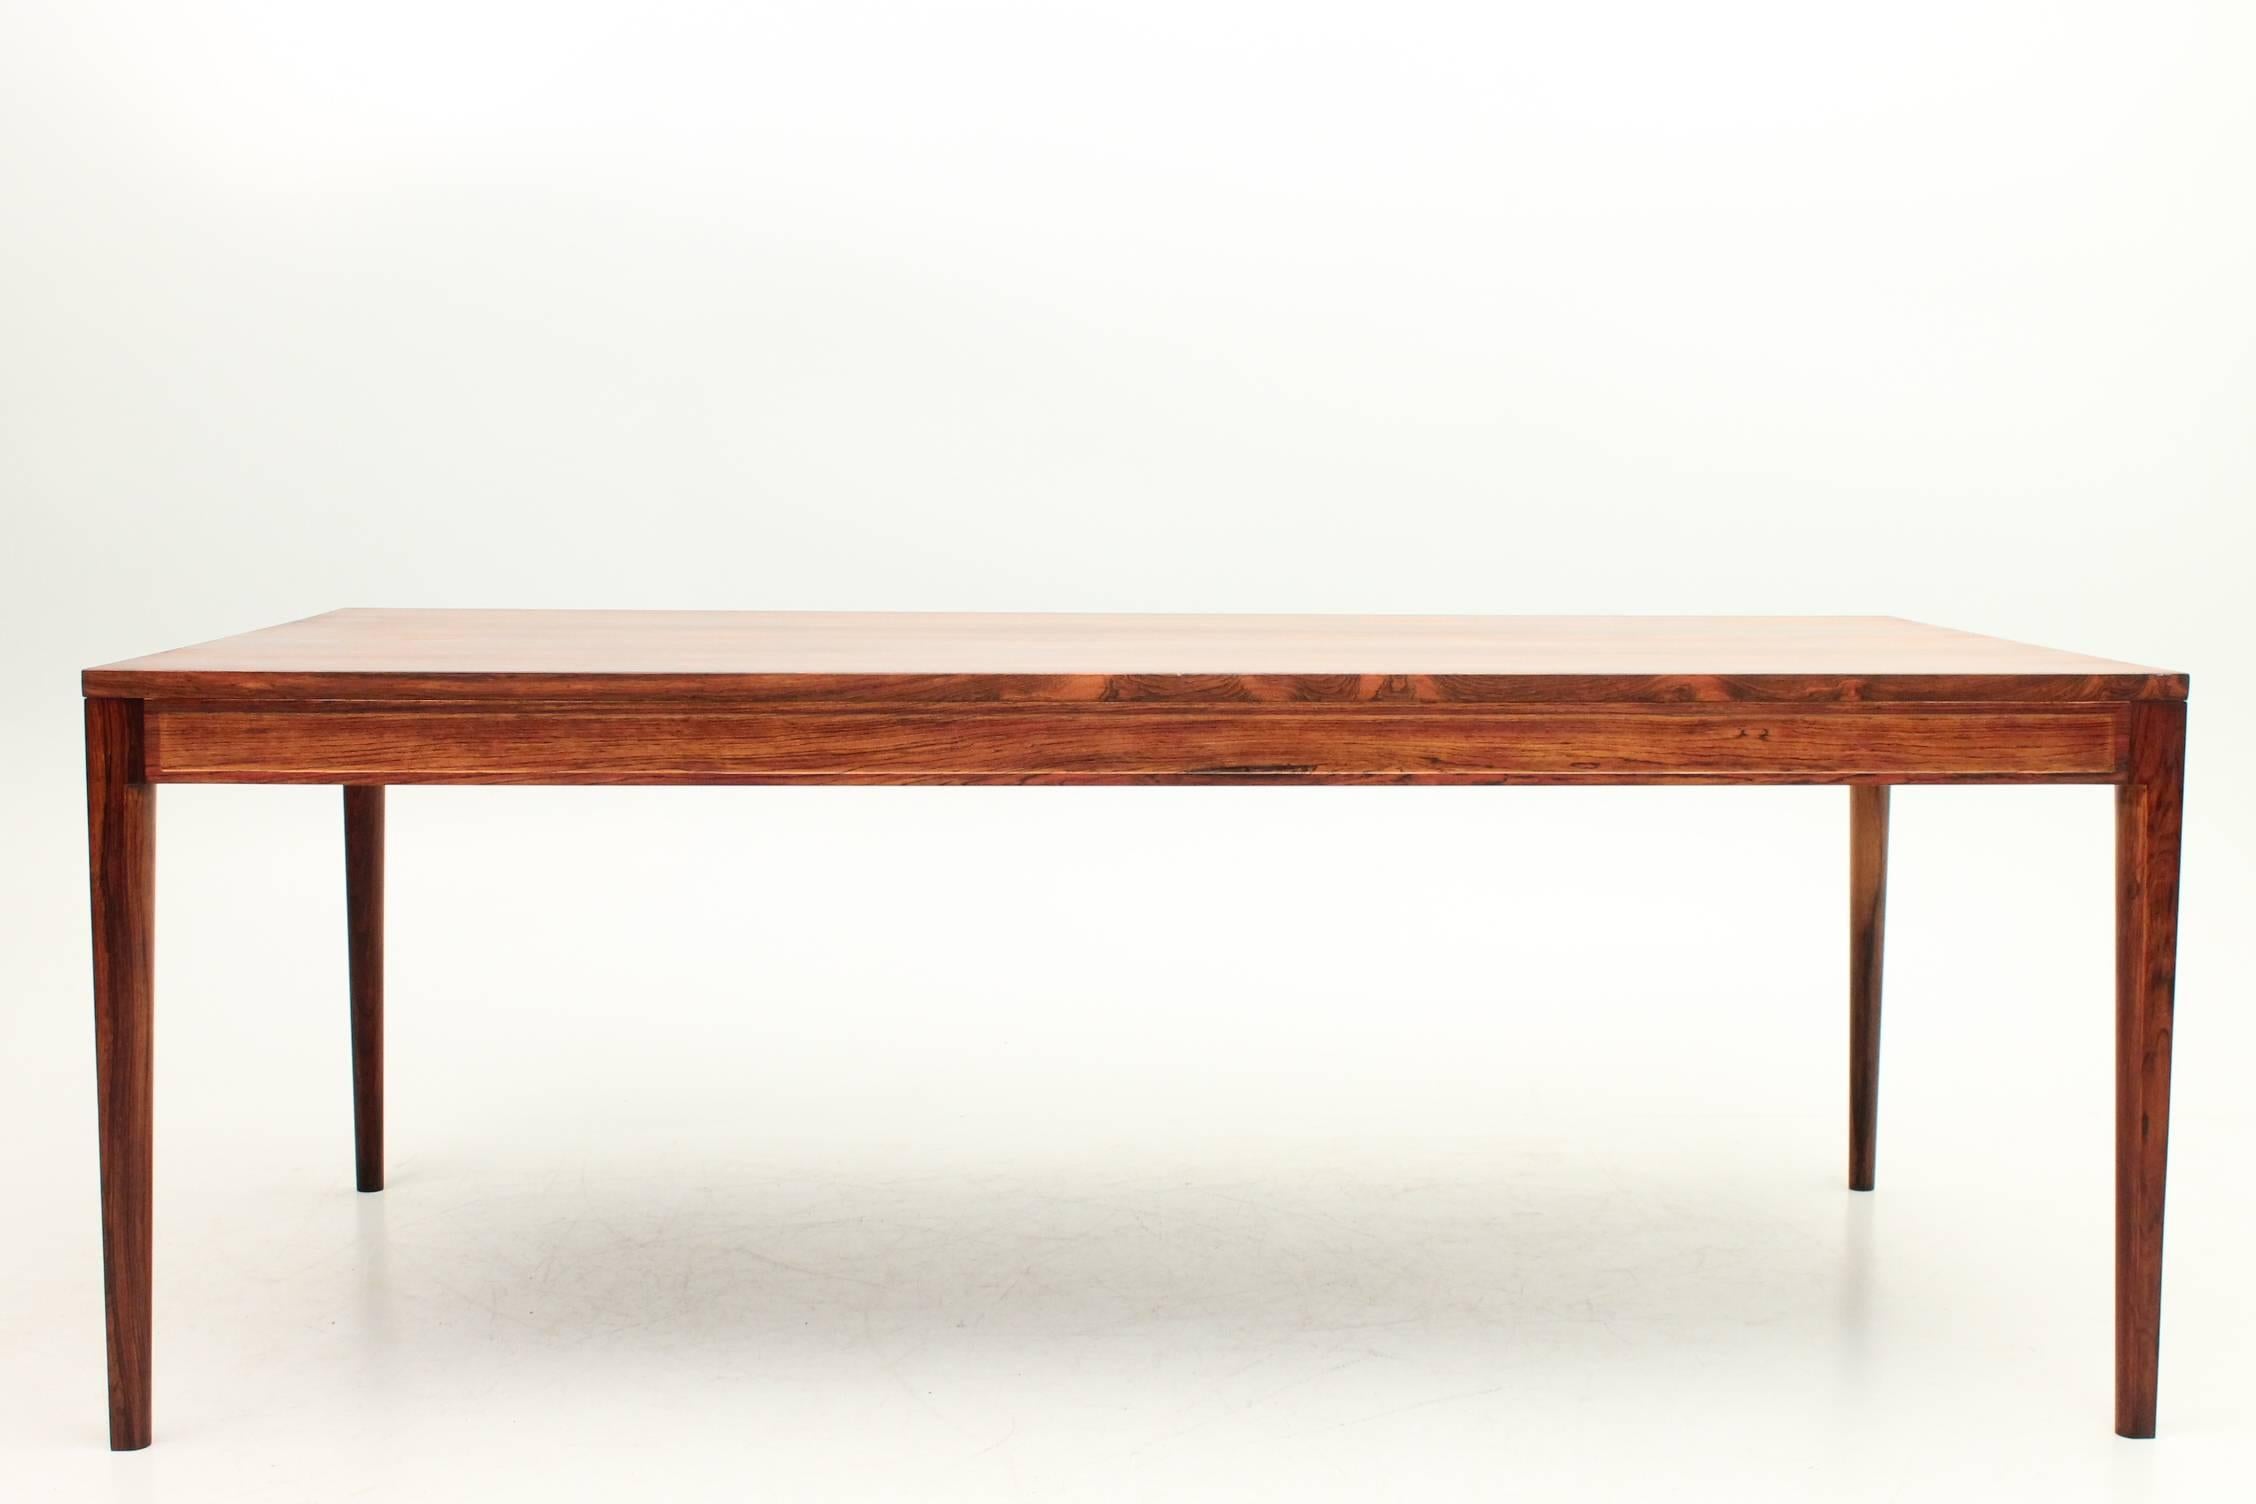 An original Diplomat table designed by Finn Juhl for France and Son. This table is in excellent condition. It would make a perfect dining room table or desk in a home or traditional office. The grain in the Macassar is extraordinary on this iconic